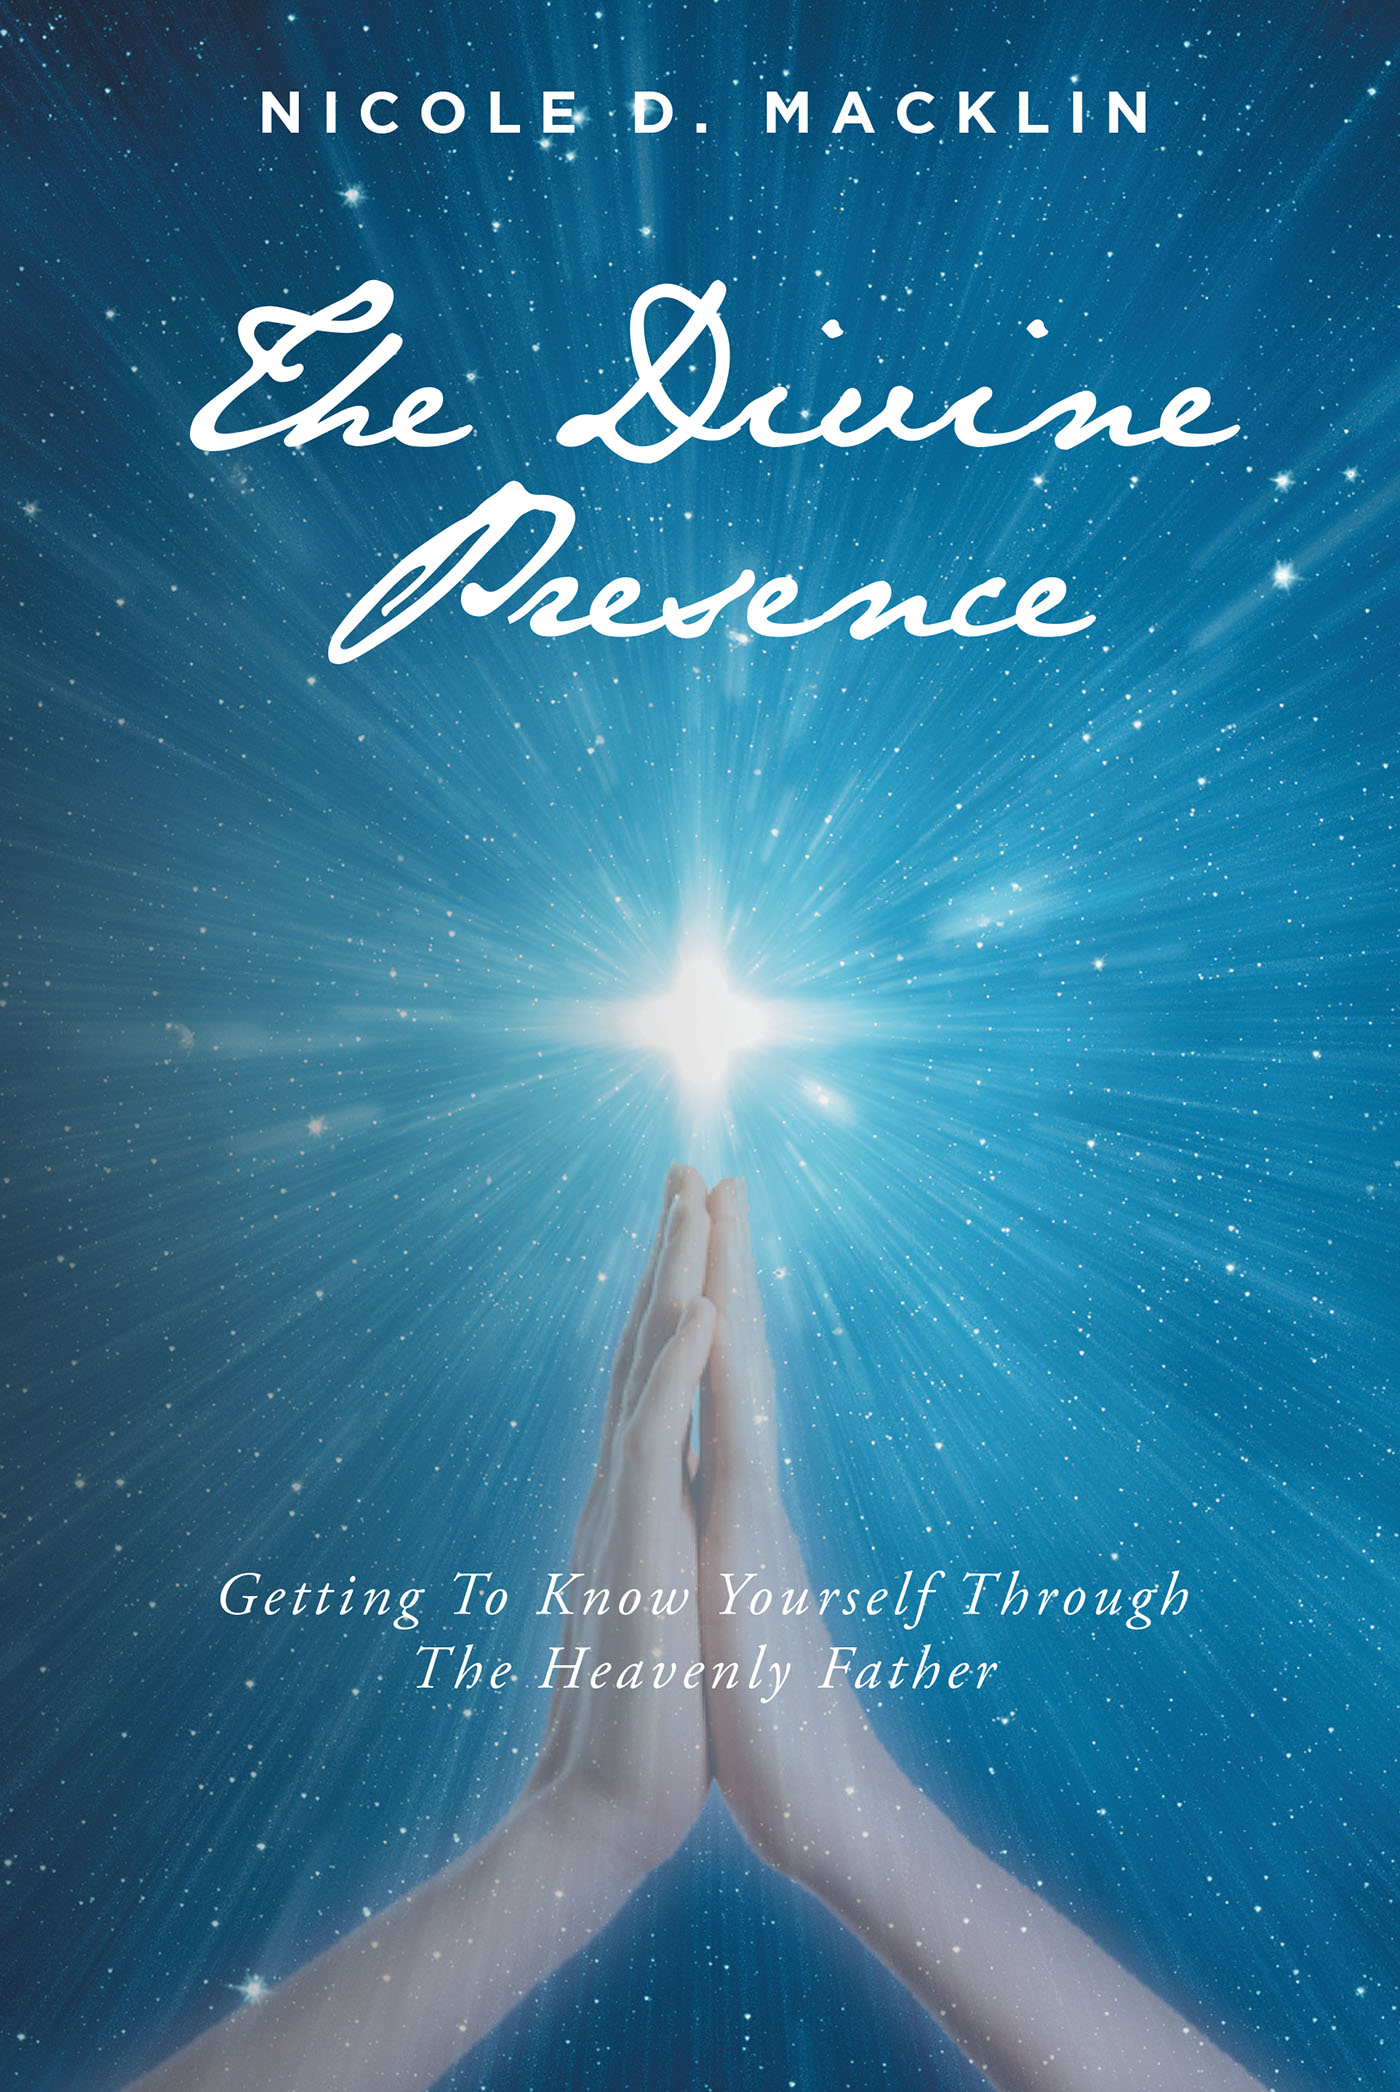 Nicole D. Macklin’s New Book, "The Divine Presence," is a Stirring Read Encouraging Readers to Place Their Faith in the Lord to Carry Them Through the Darkest of Times